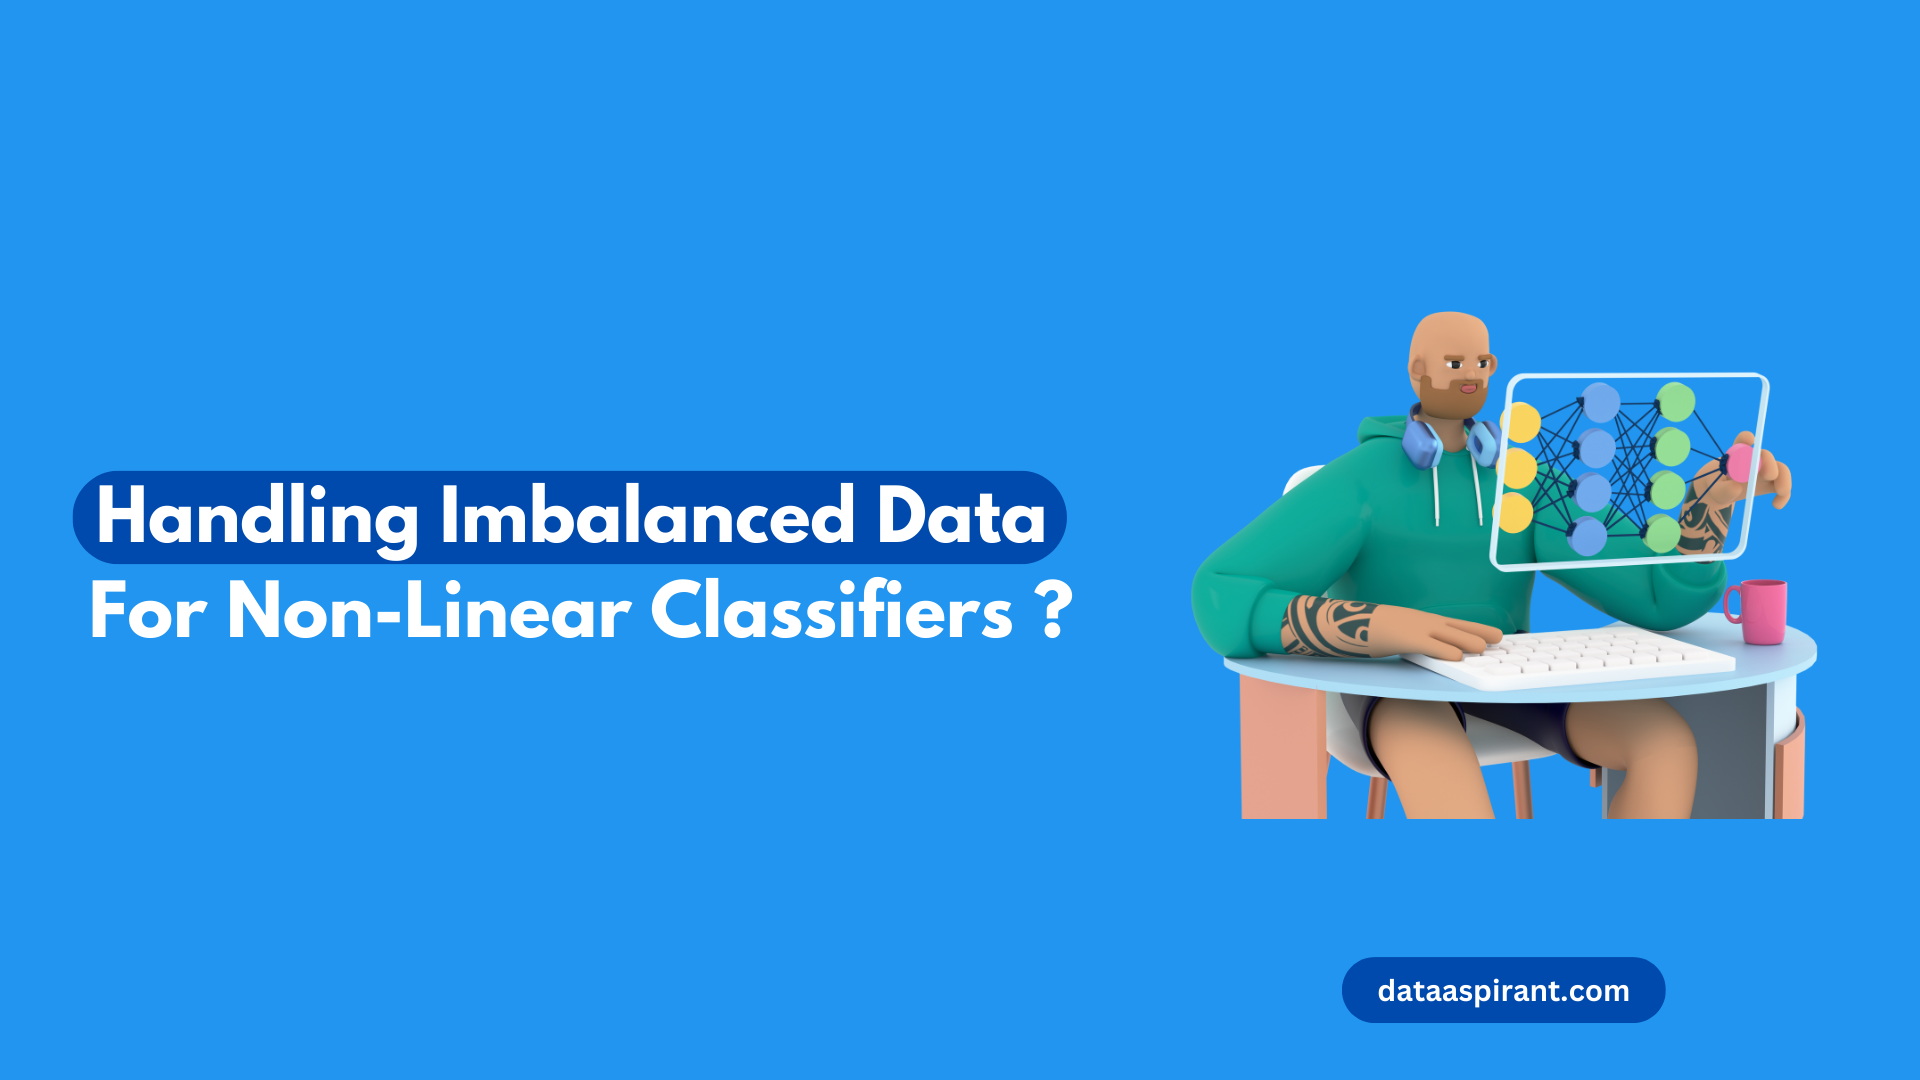 Handling Imbalanced Data with Non-Linear Classifiers